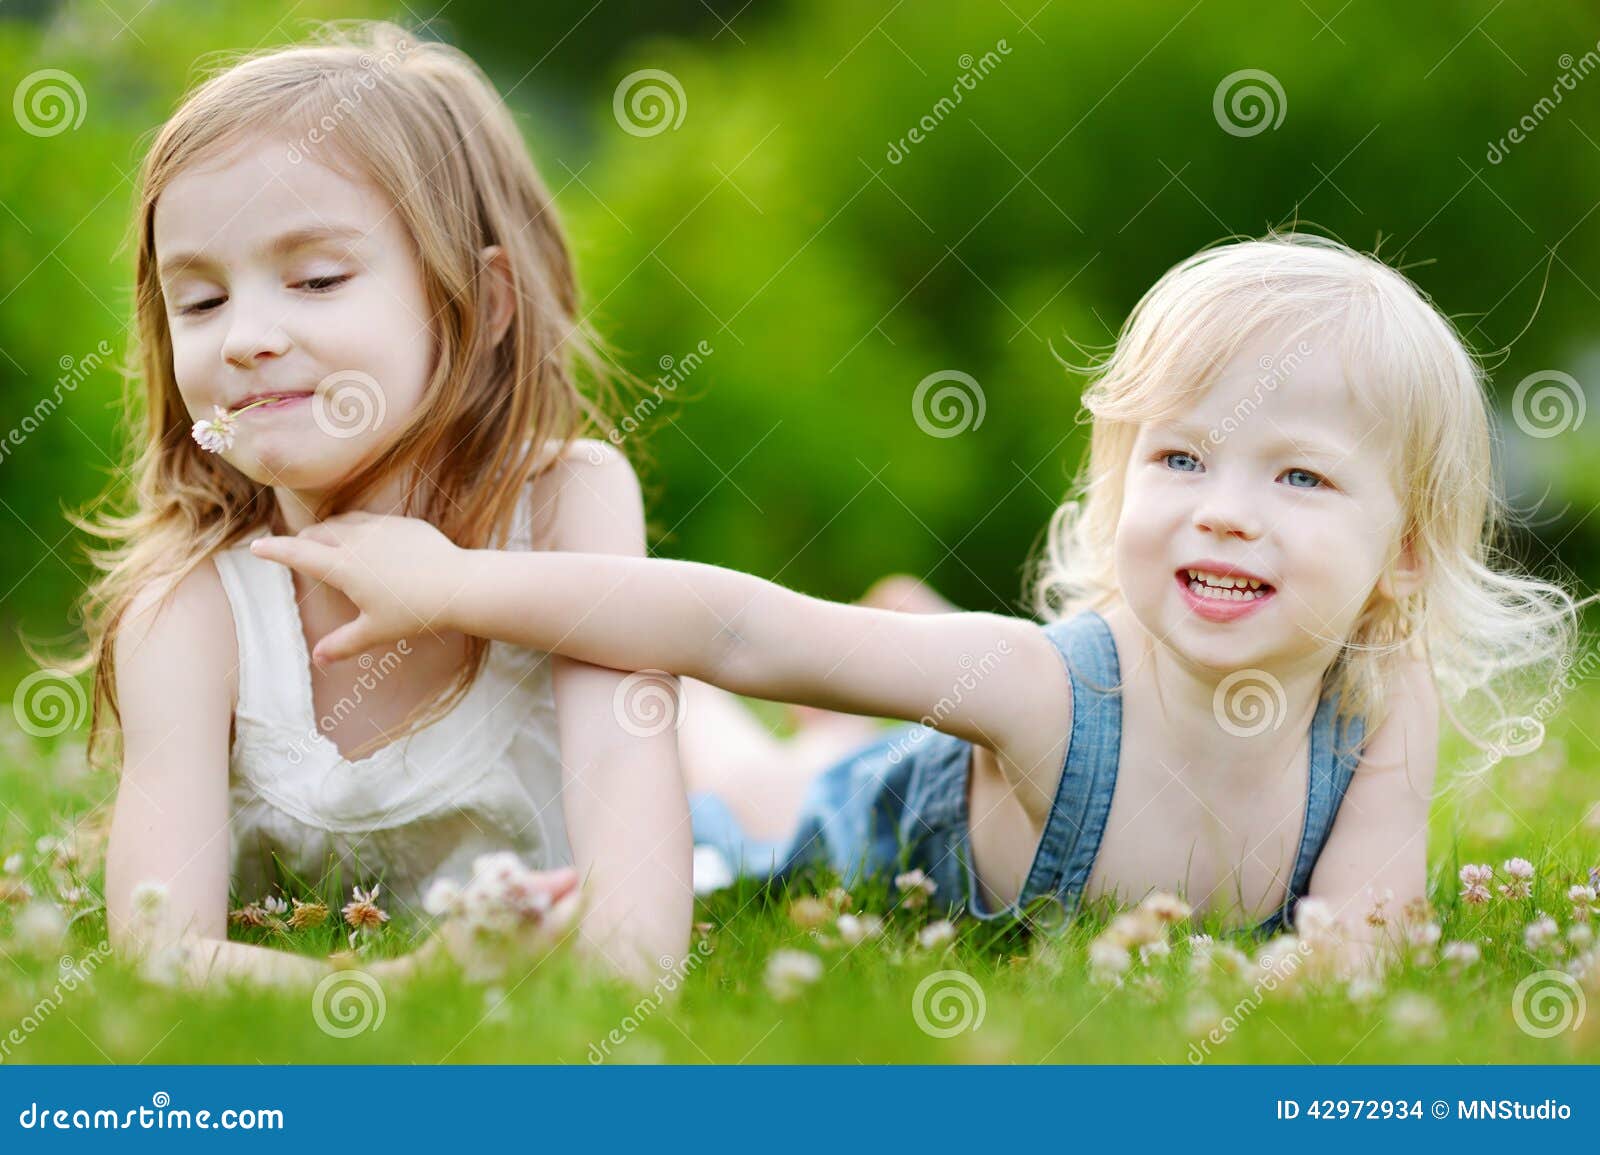 Two Cute Little Sisters Laying in the Grass Stock Photo - Image of ...